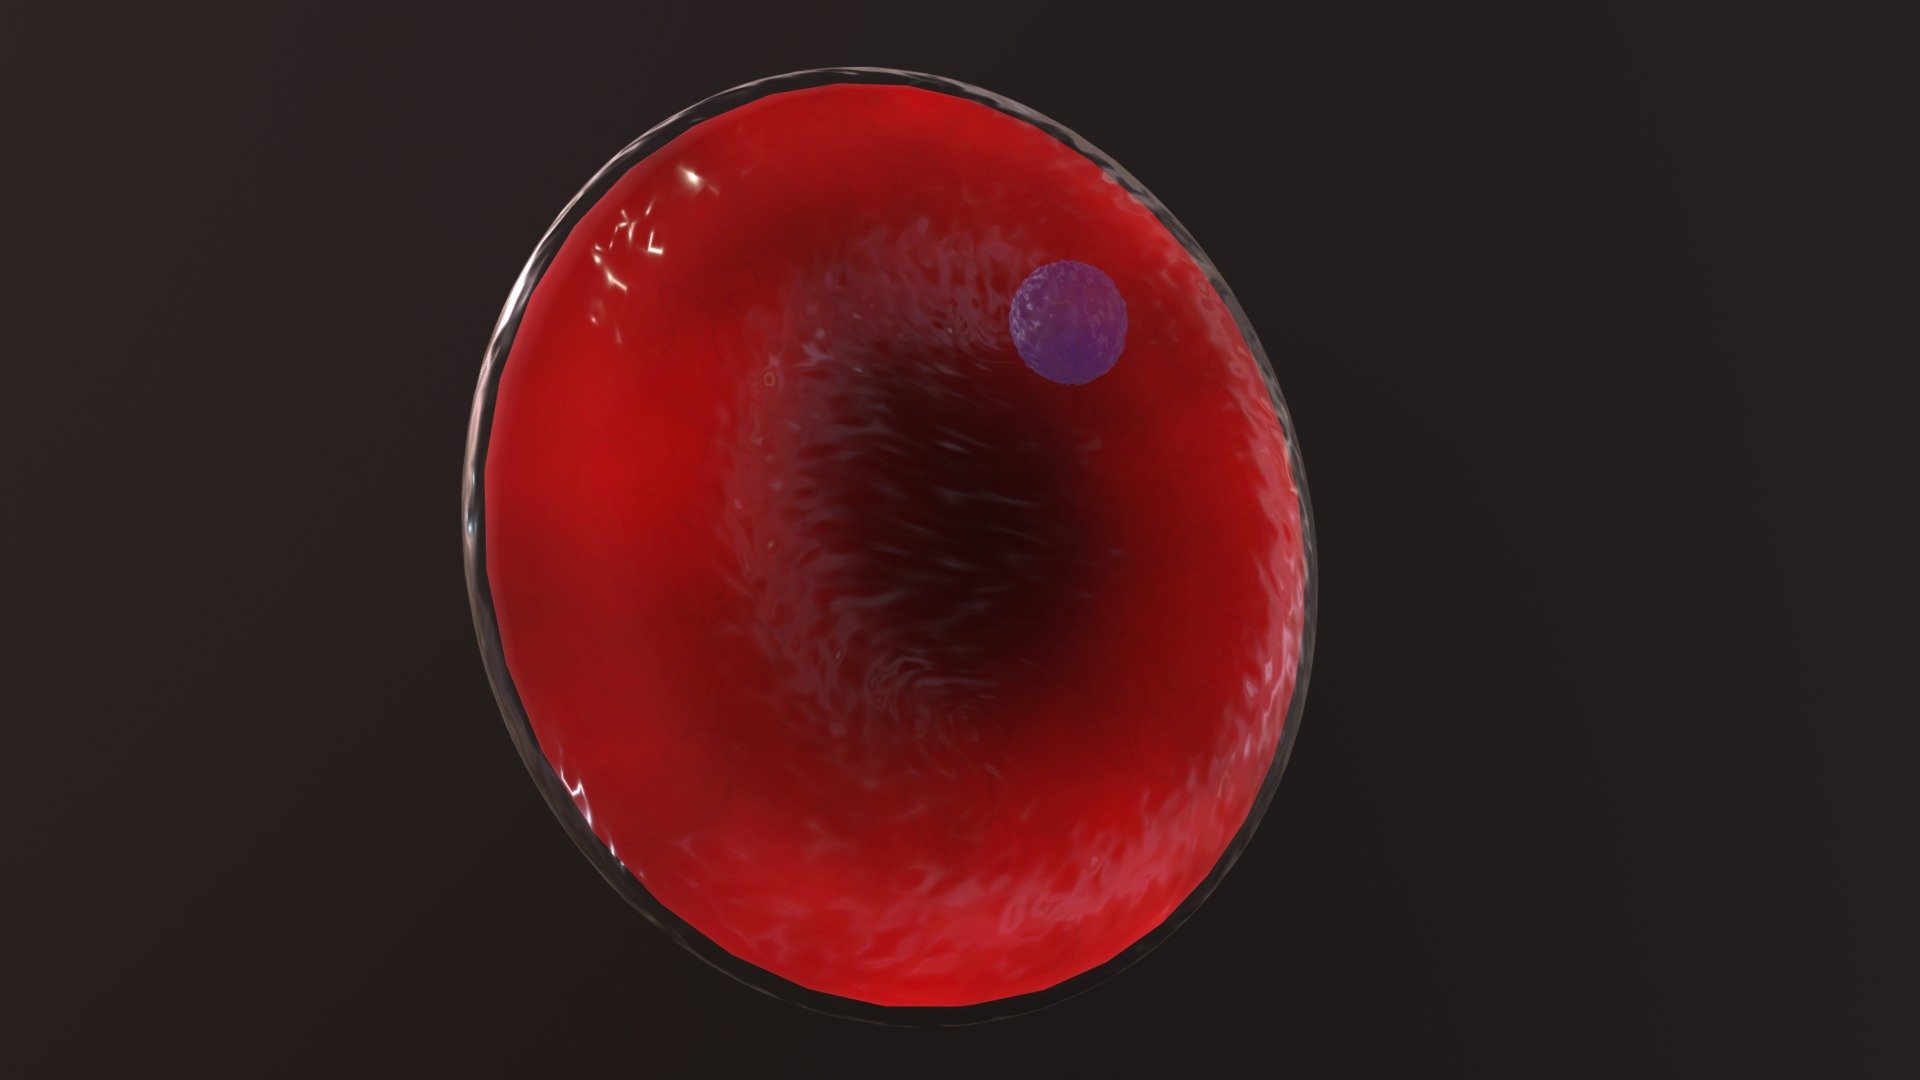 A Howell-Jolly body is an erythrocyte inclusion. While erythrocytes should be anuclear, some may retain DNA fragments of a nucleuslike that seen here. On the peripheral blood smear, they  appear as a typically single, darkly staining inclusion.

Normally, the spleen will filter this type of cell. If they are seen in the blood smear, they are indicative of decreased splenic function or normally seen after a splenectomy procedure 3d model